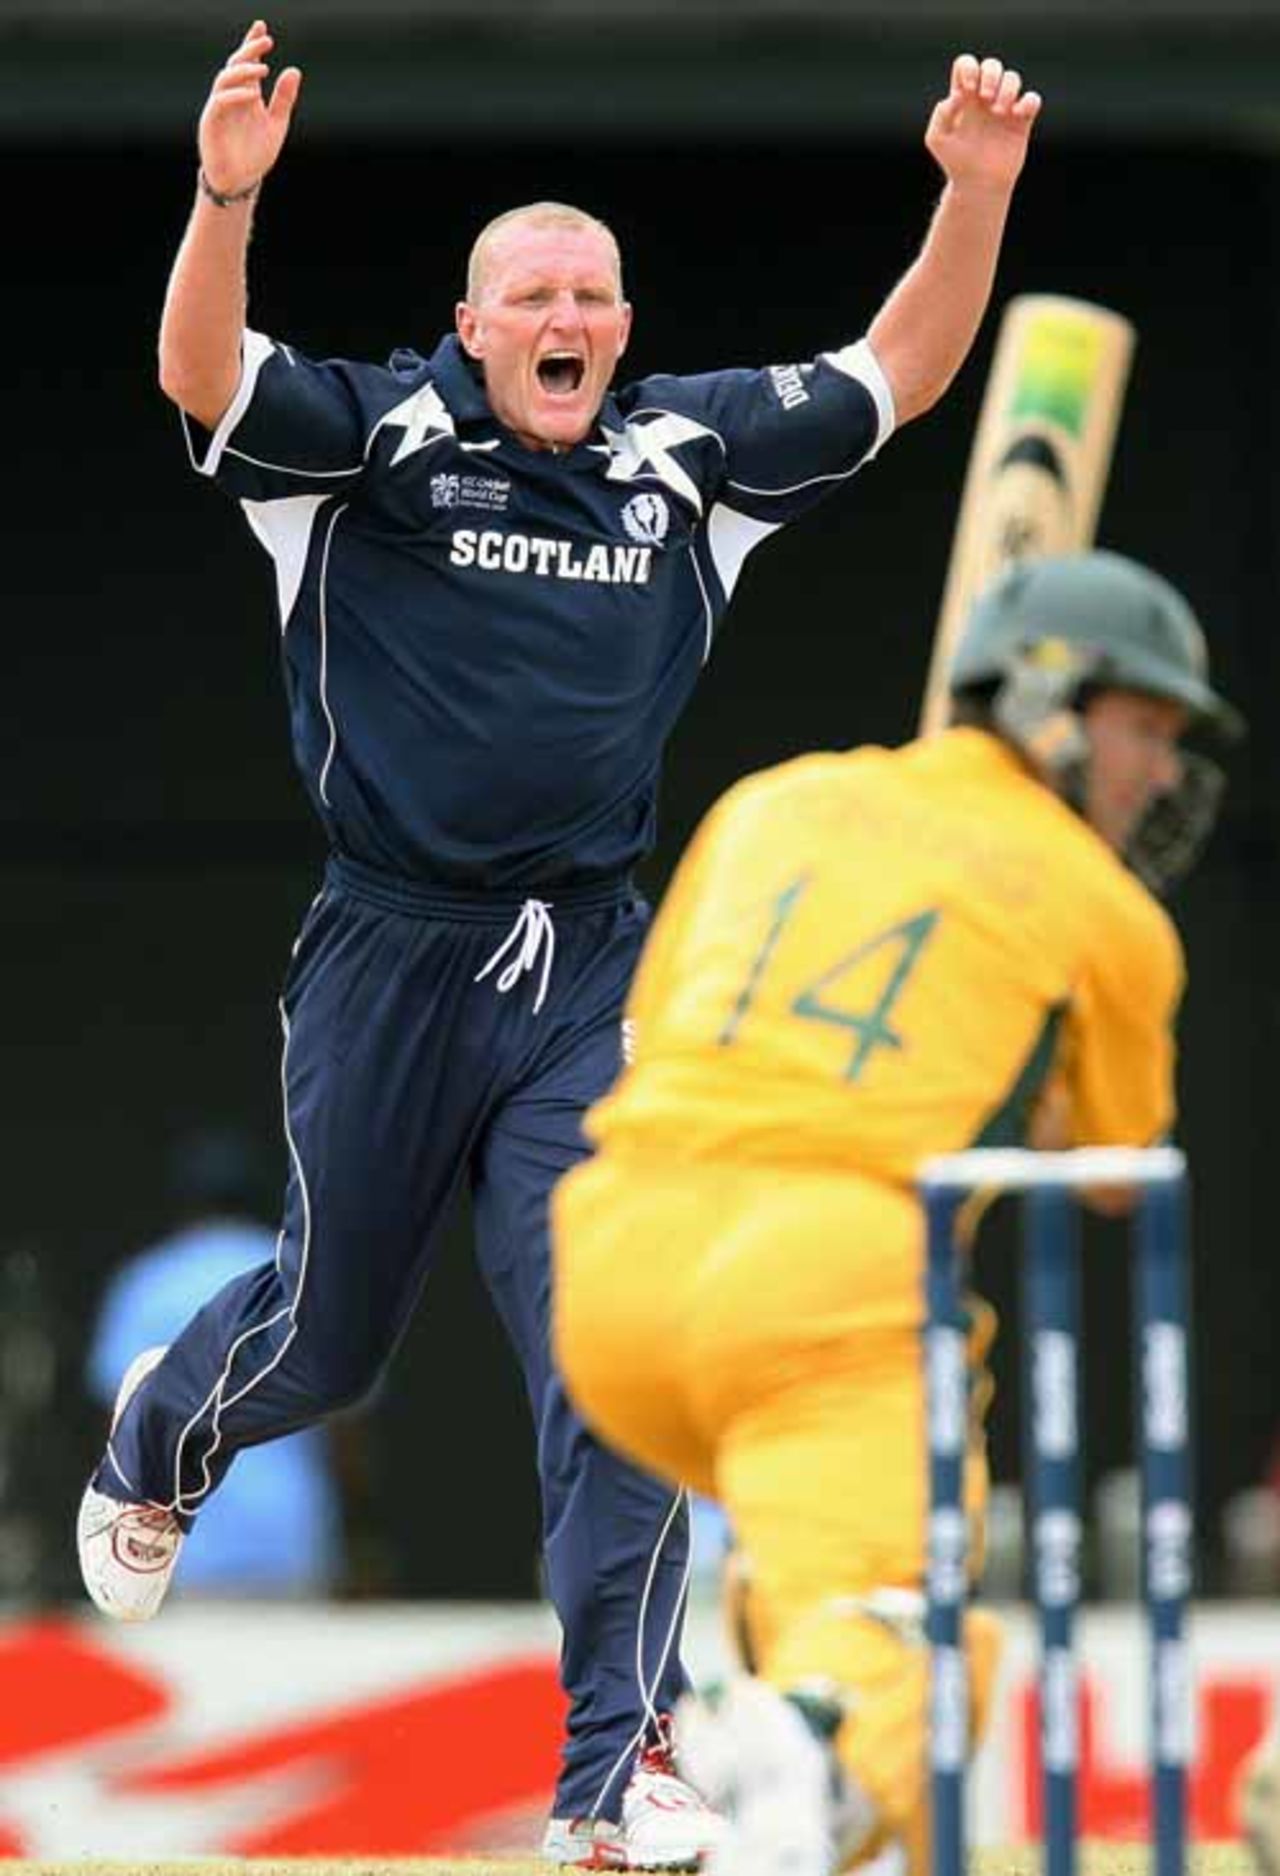 Dougie Brown reacts after a close call against Ricky Ponting, Australia v Scotland, Group A, Basseterre, 2007 World Cup, March 14, 2007